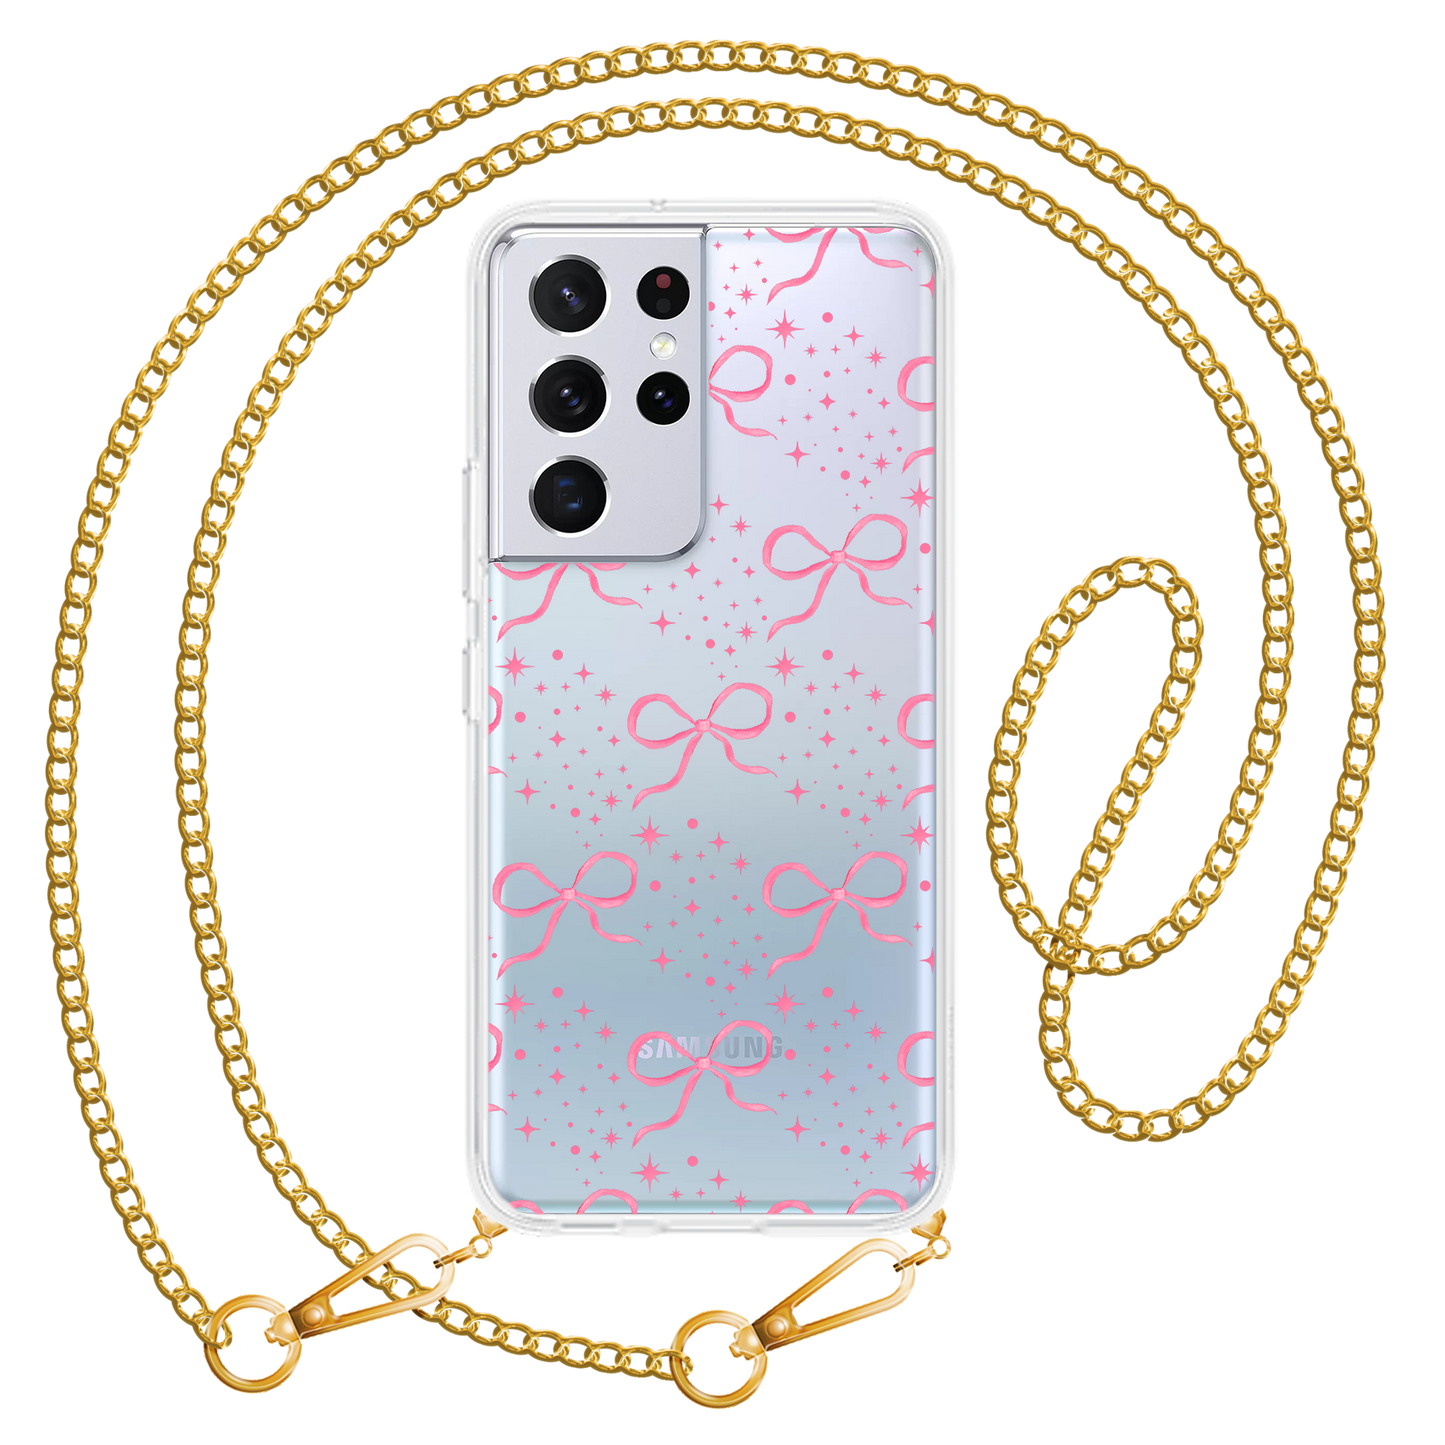 Android Rearguard Hybrid Case - Coquette Glittery Bow